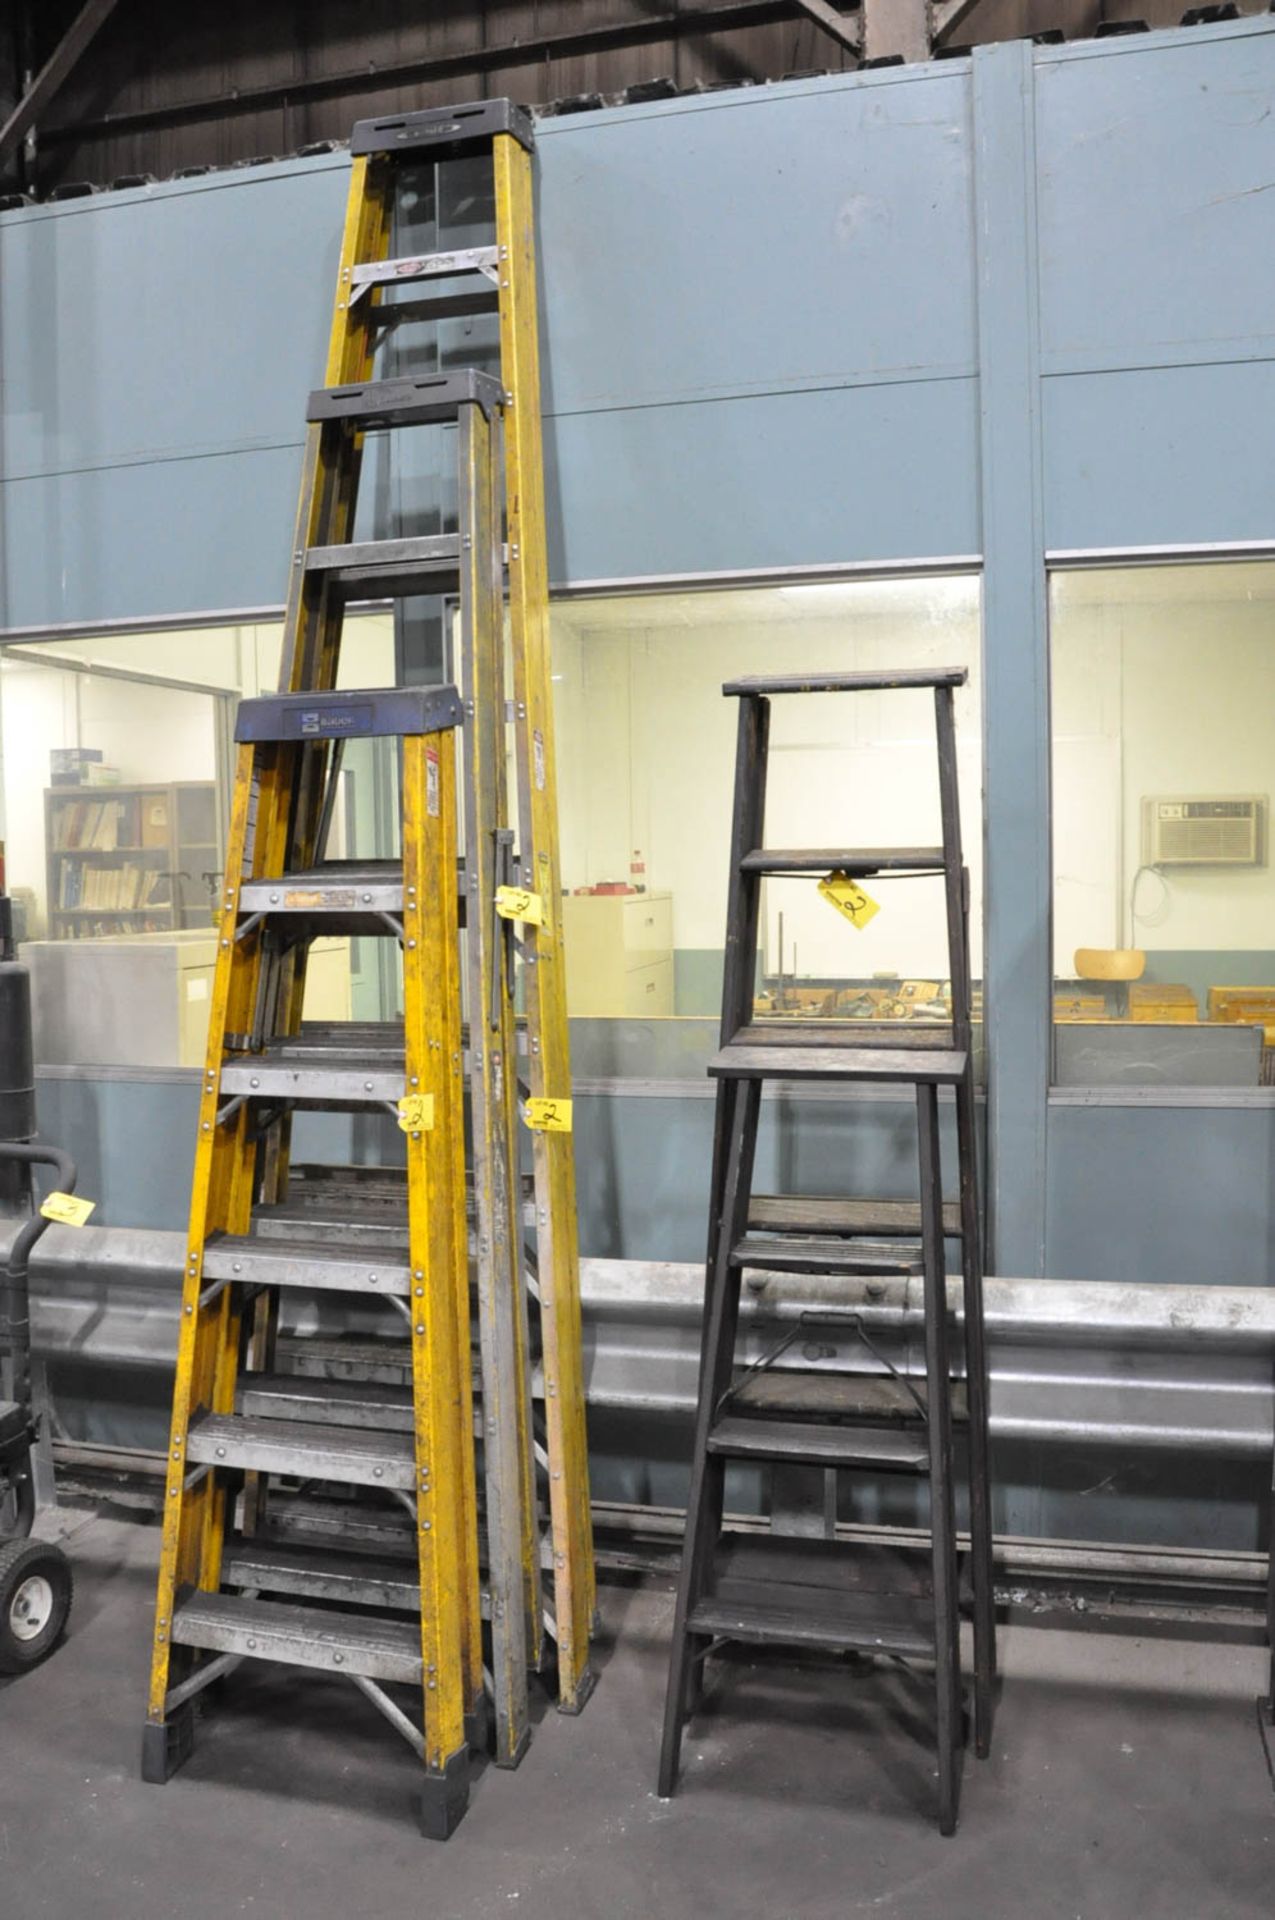 (1) 6', (1) 8' AND (1) 10' FIBERGLASS STEP LADDERS WITH (1) 6' AND (1) 4' WOOD STEP LADDERS, (TOOL